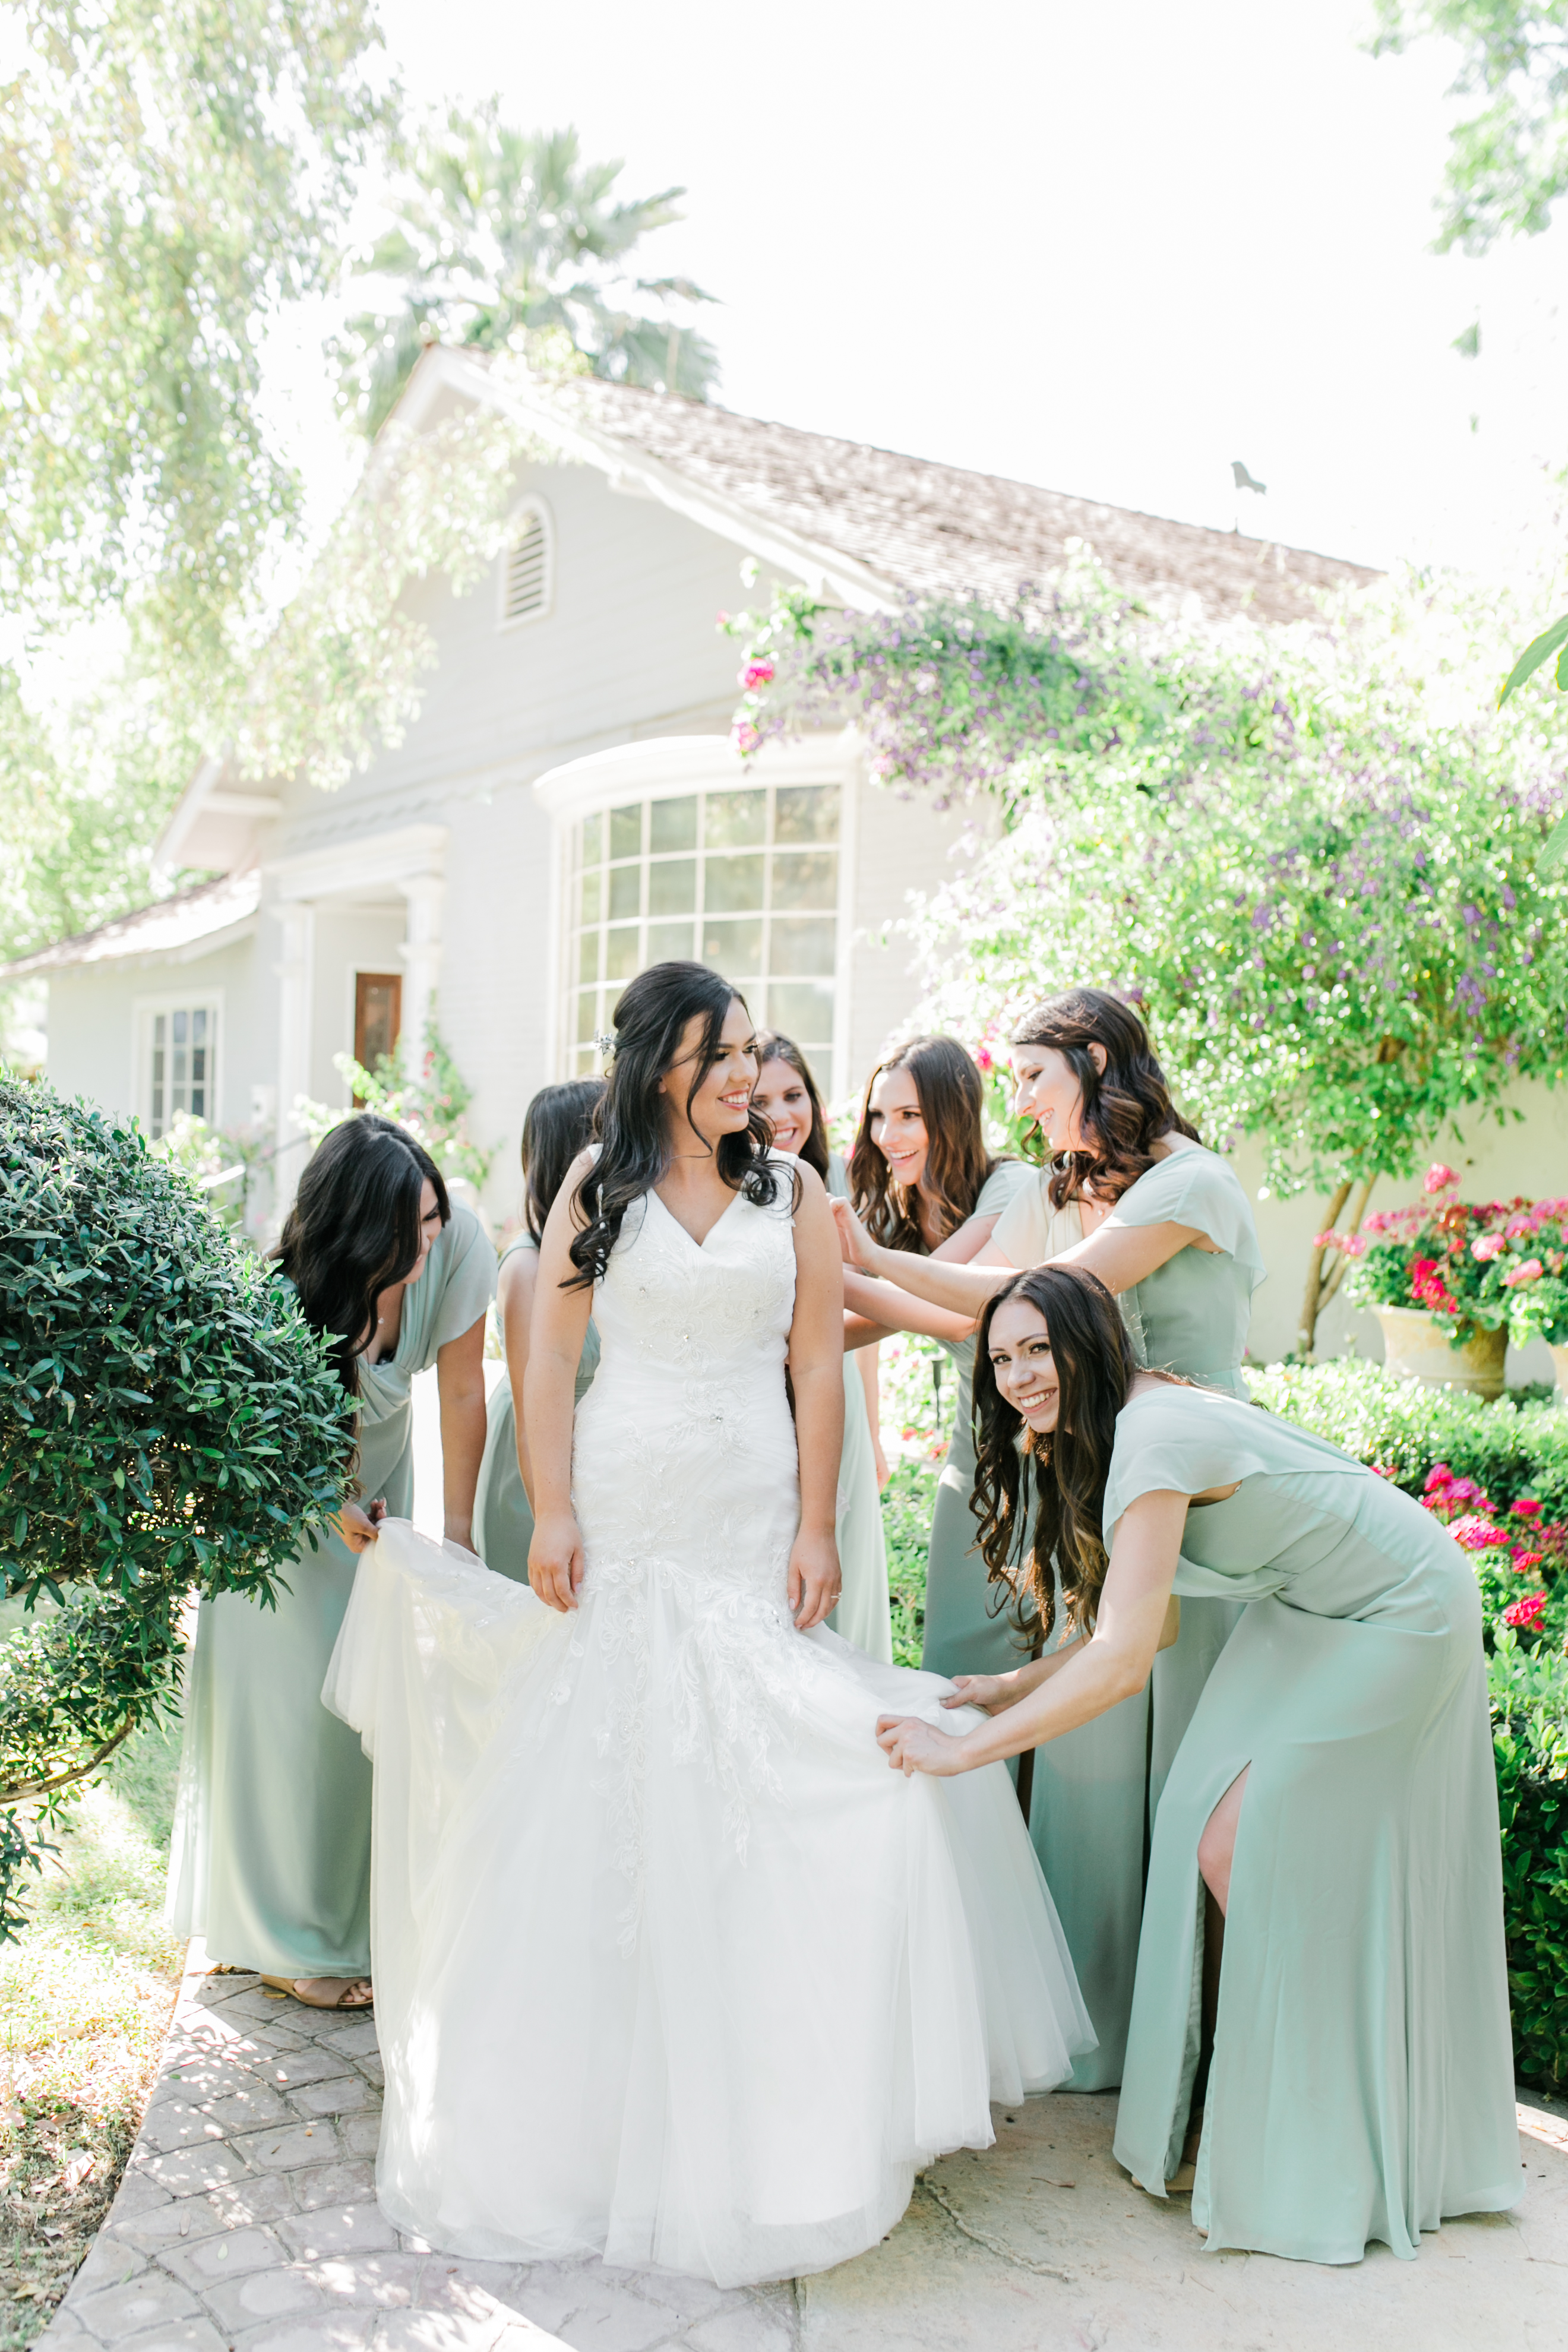 Claire & PJ | Karlie Colleen Photography